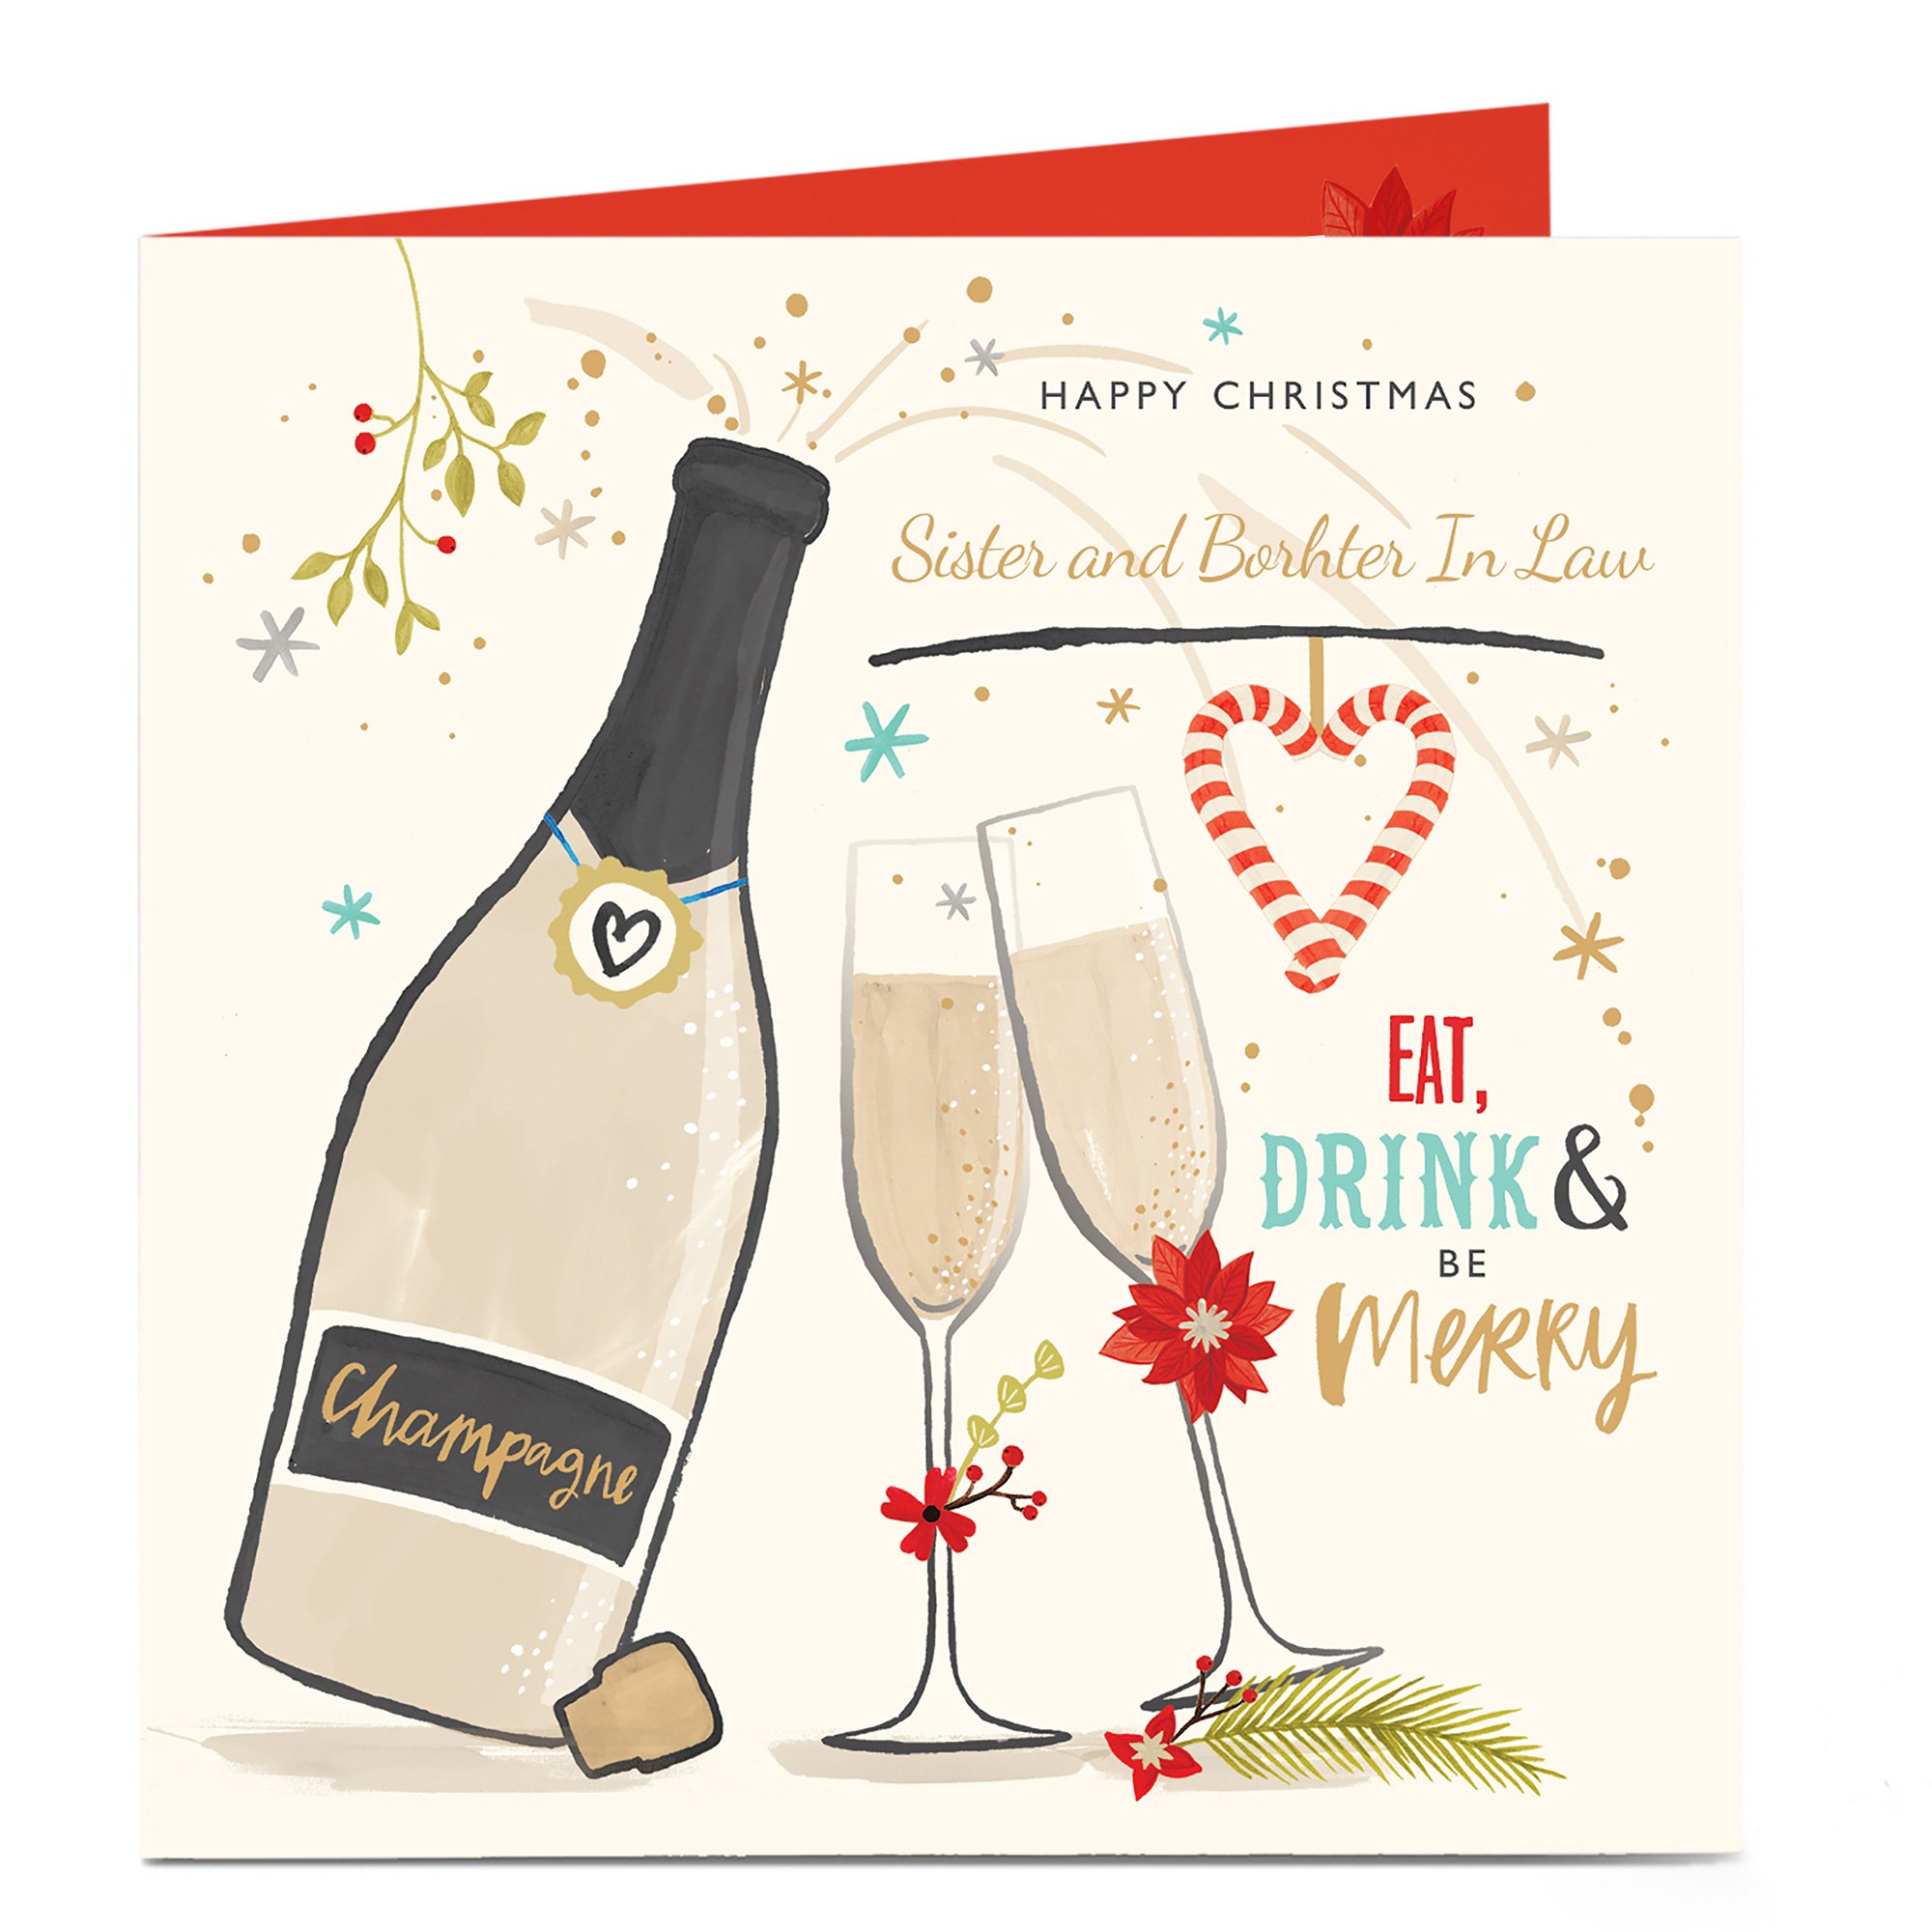 Personalised Christmas Card - Be Merry! Sister & Brother-in-law